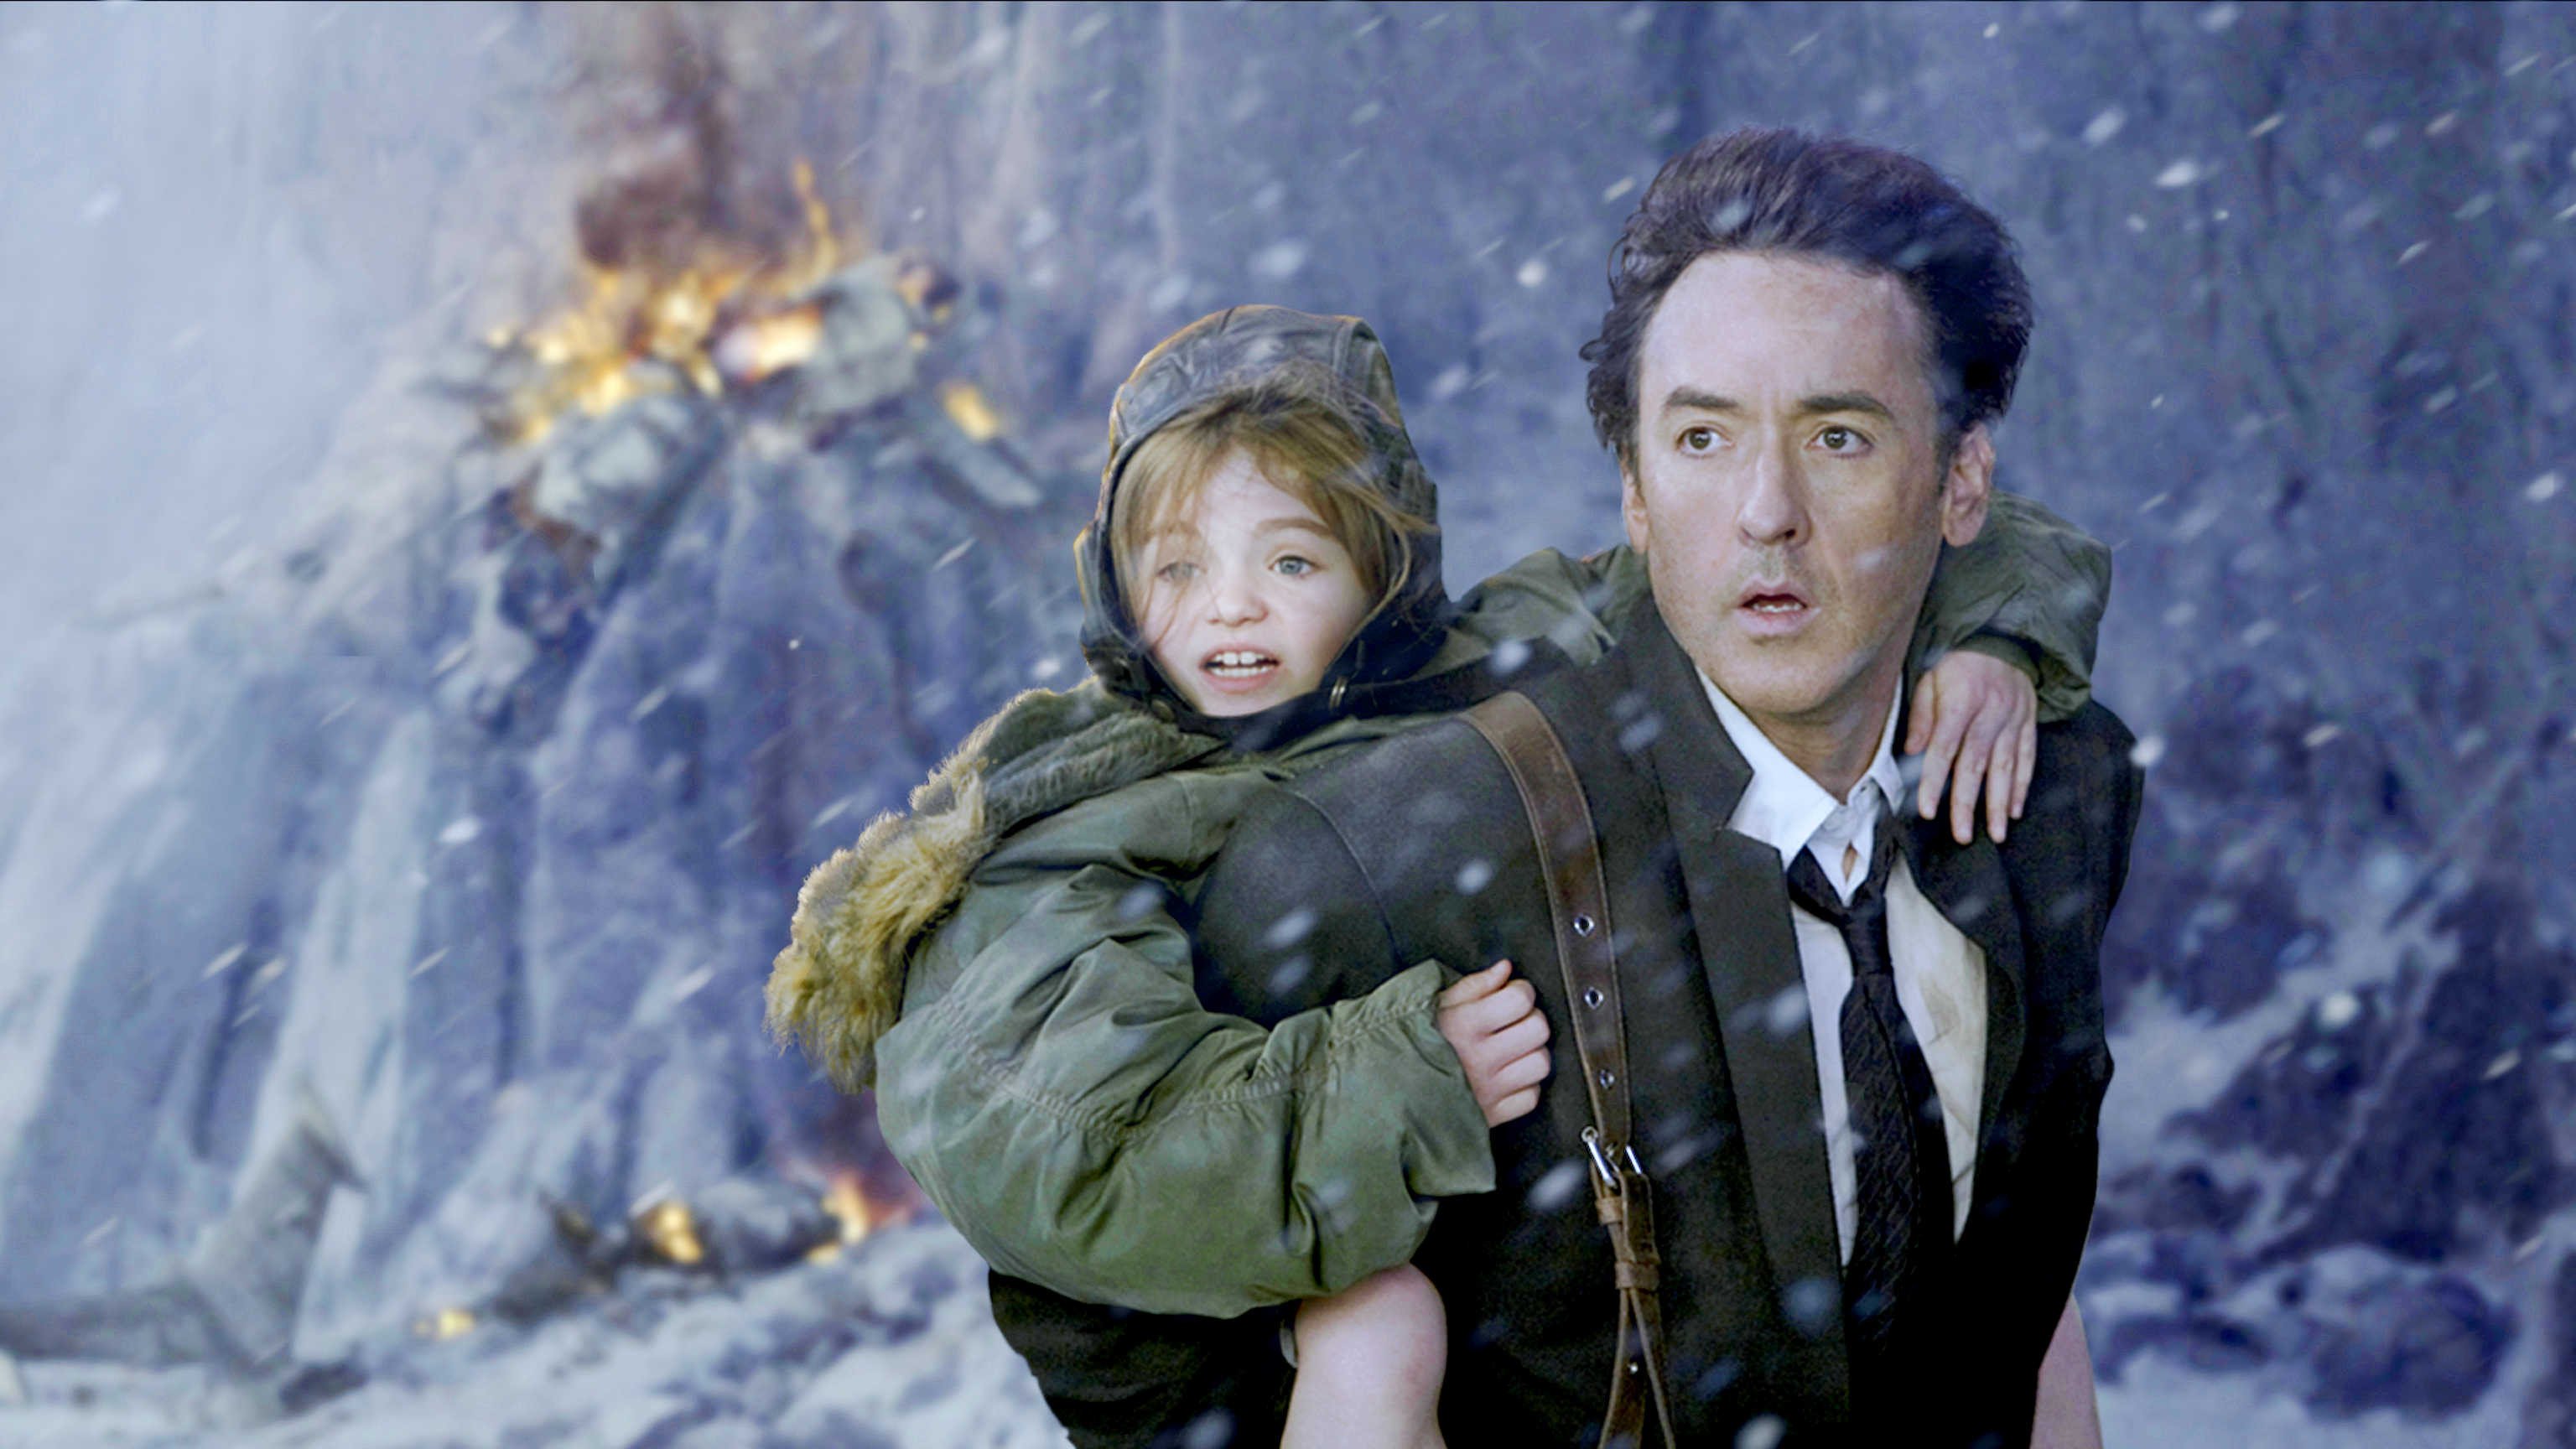 John Cusack as Jackson Curtis, a failed writer who tries to save his family as the world ends; and Morgan Lily as his daughter Lilly in a still from “2012”.